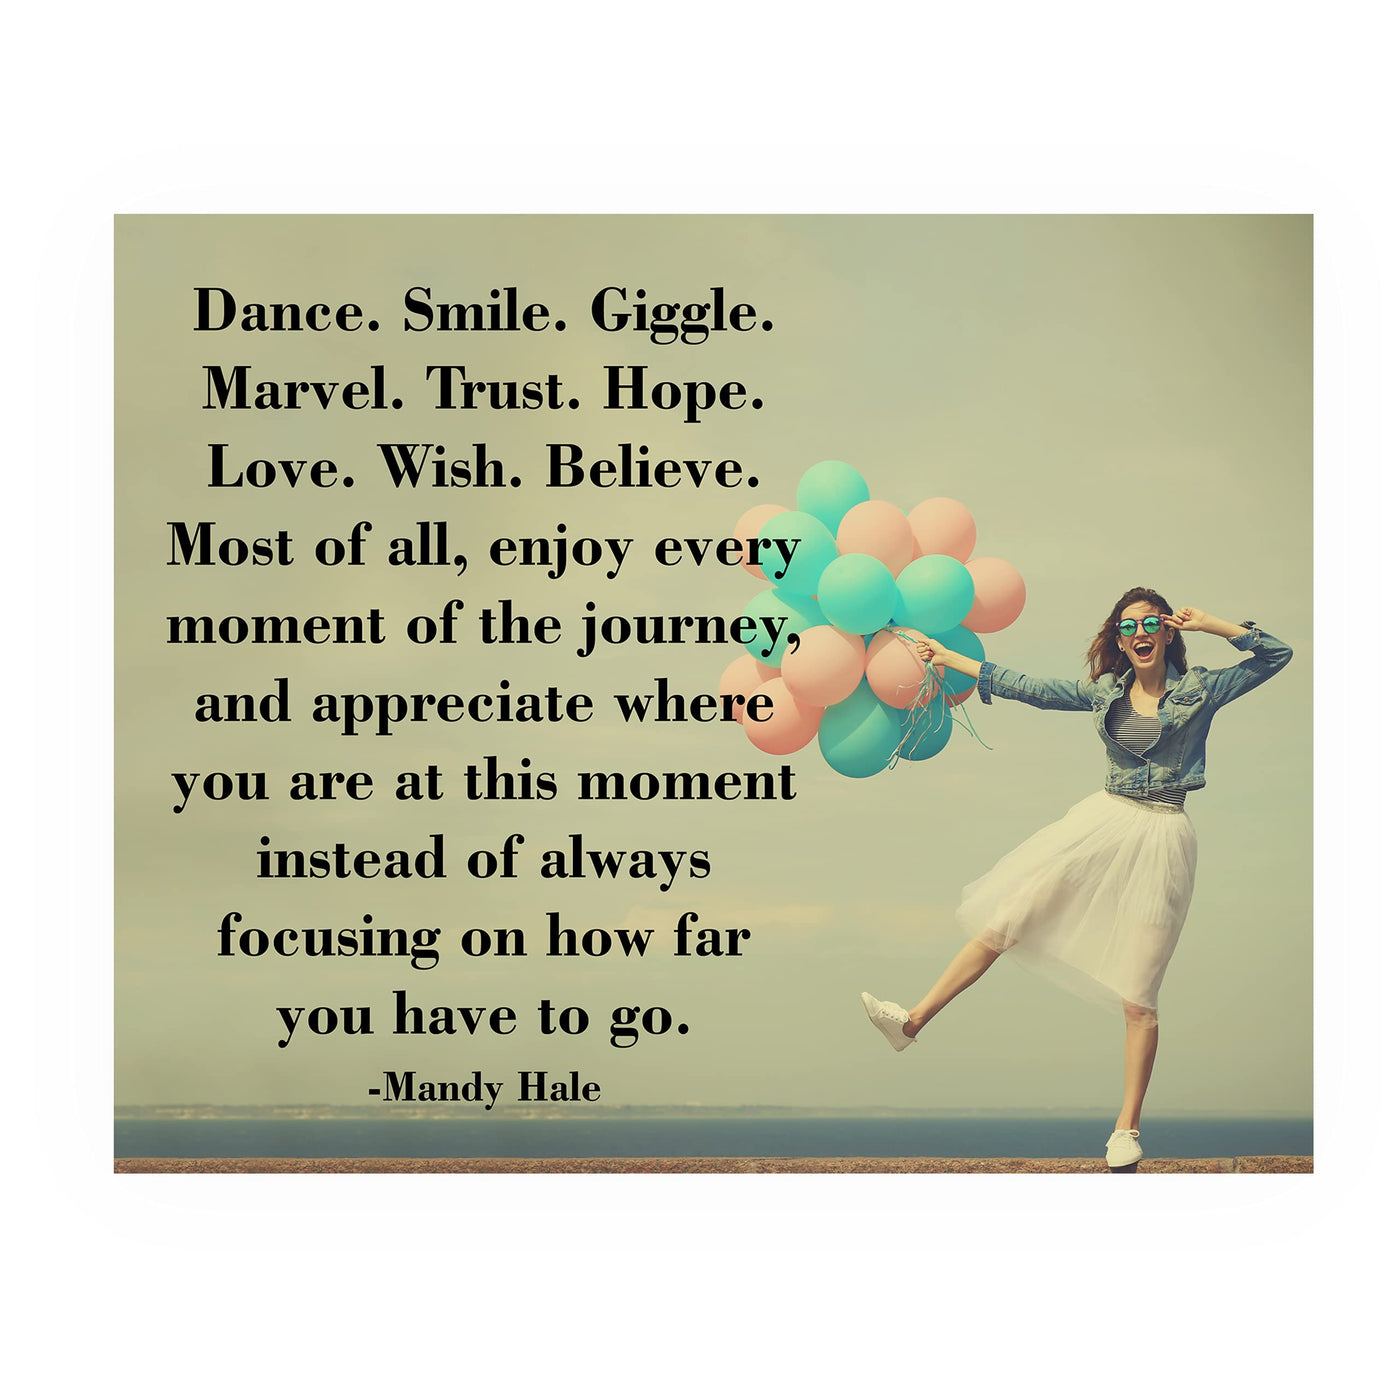 Enjoy Every Moment of the Journey-Inspirational Quotes Wall Art-10x8" Typographic Woman w/Balloons Photo Print-Ready to Frame. Motivational Home-Office-Classroom Decor. Great Gift for Inspiration!